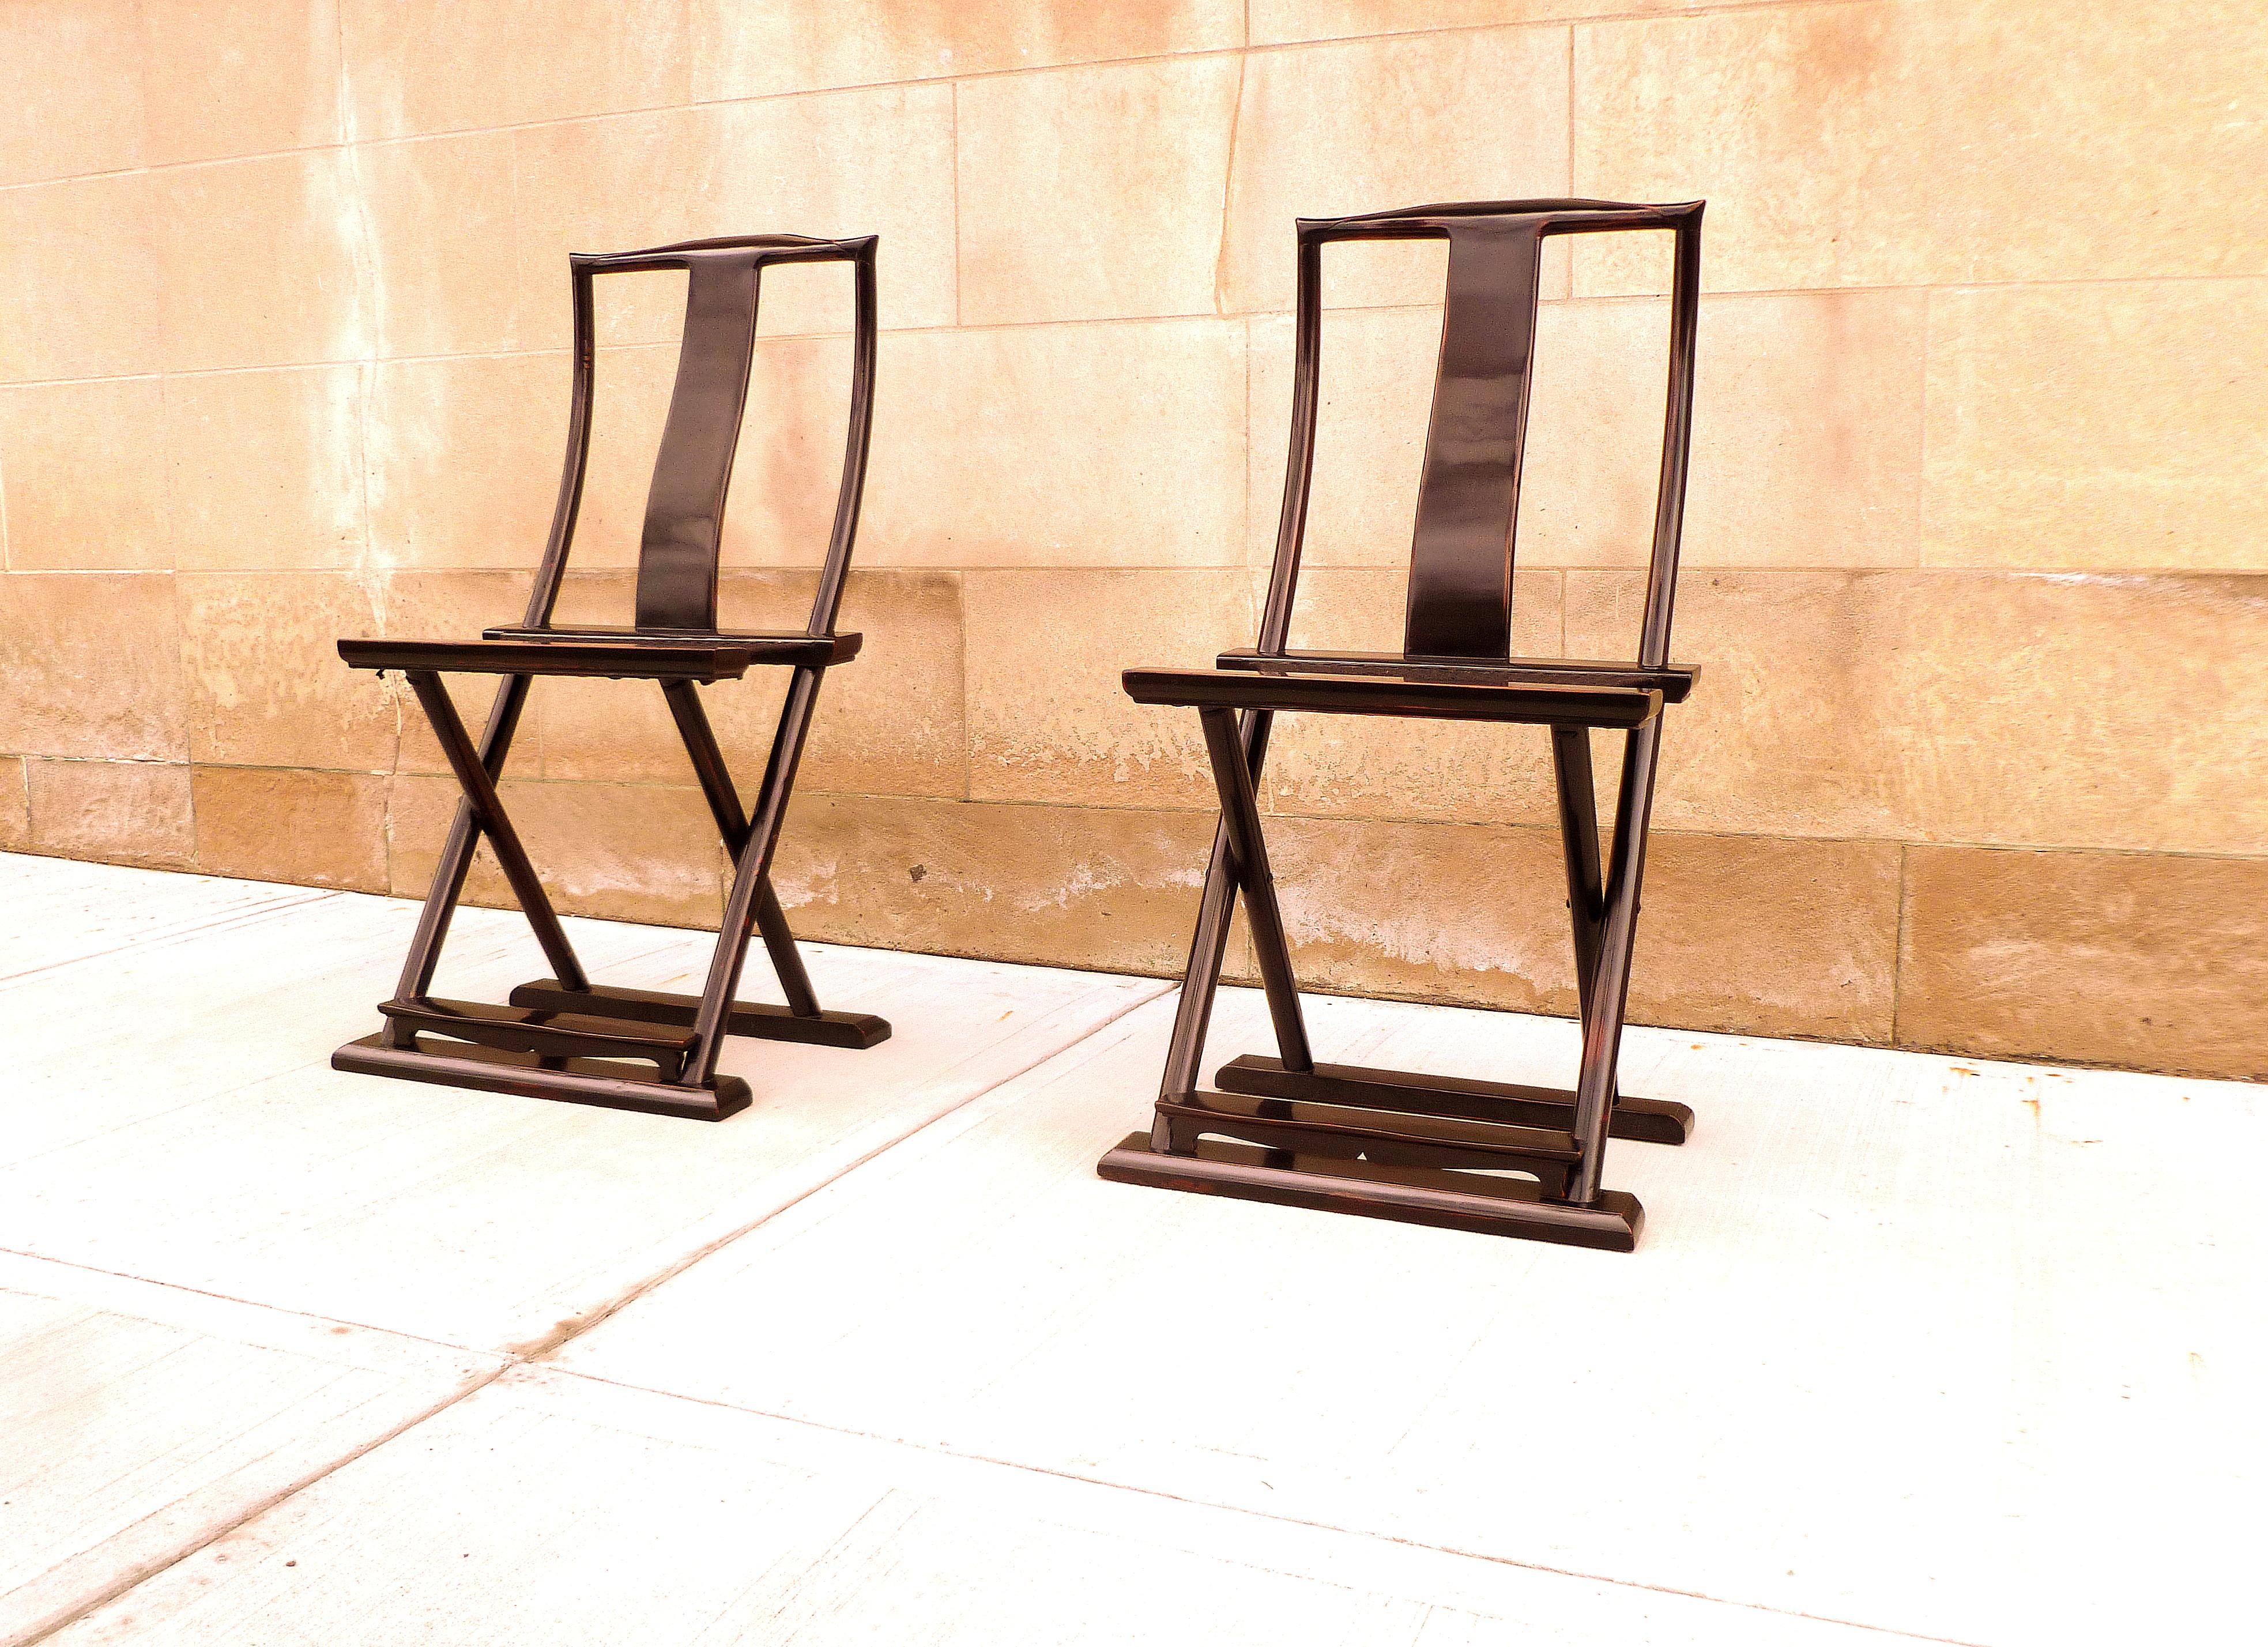 Polished Pair of Black Lacquer Folding Chairs